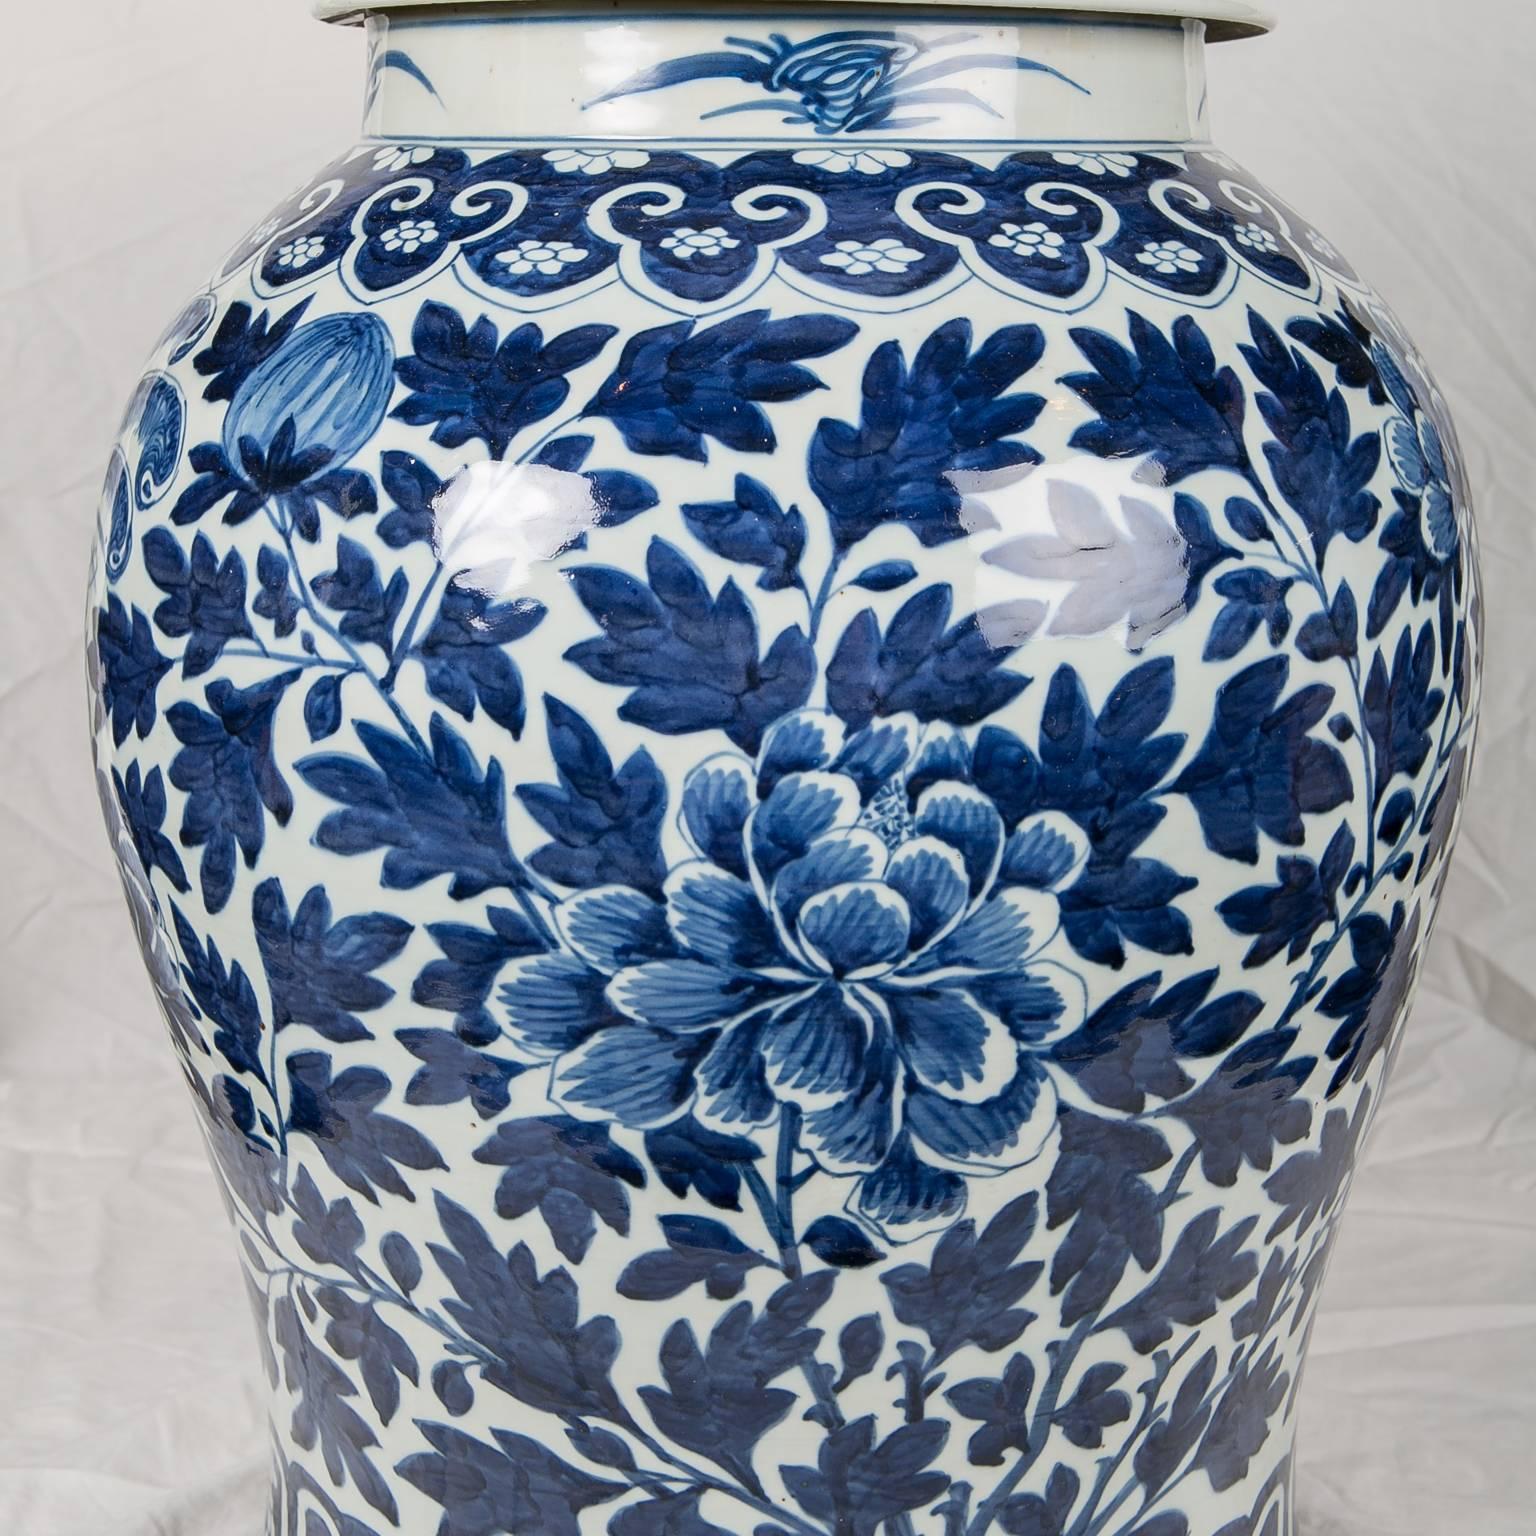 Qing Blue and White Chinese Porcelain Ginger Jars